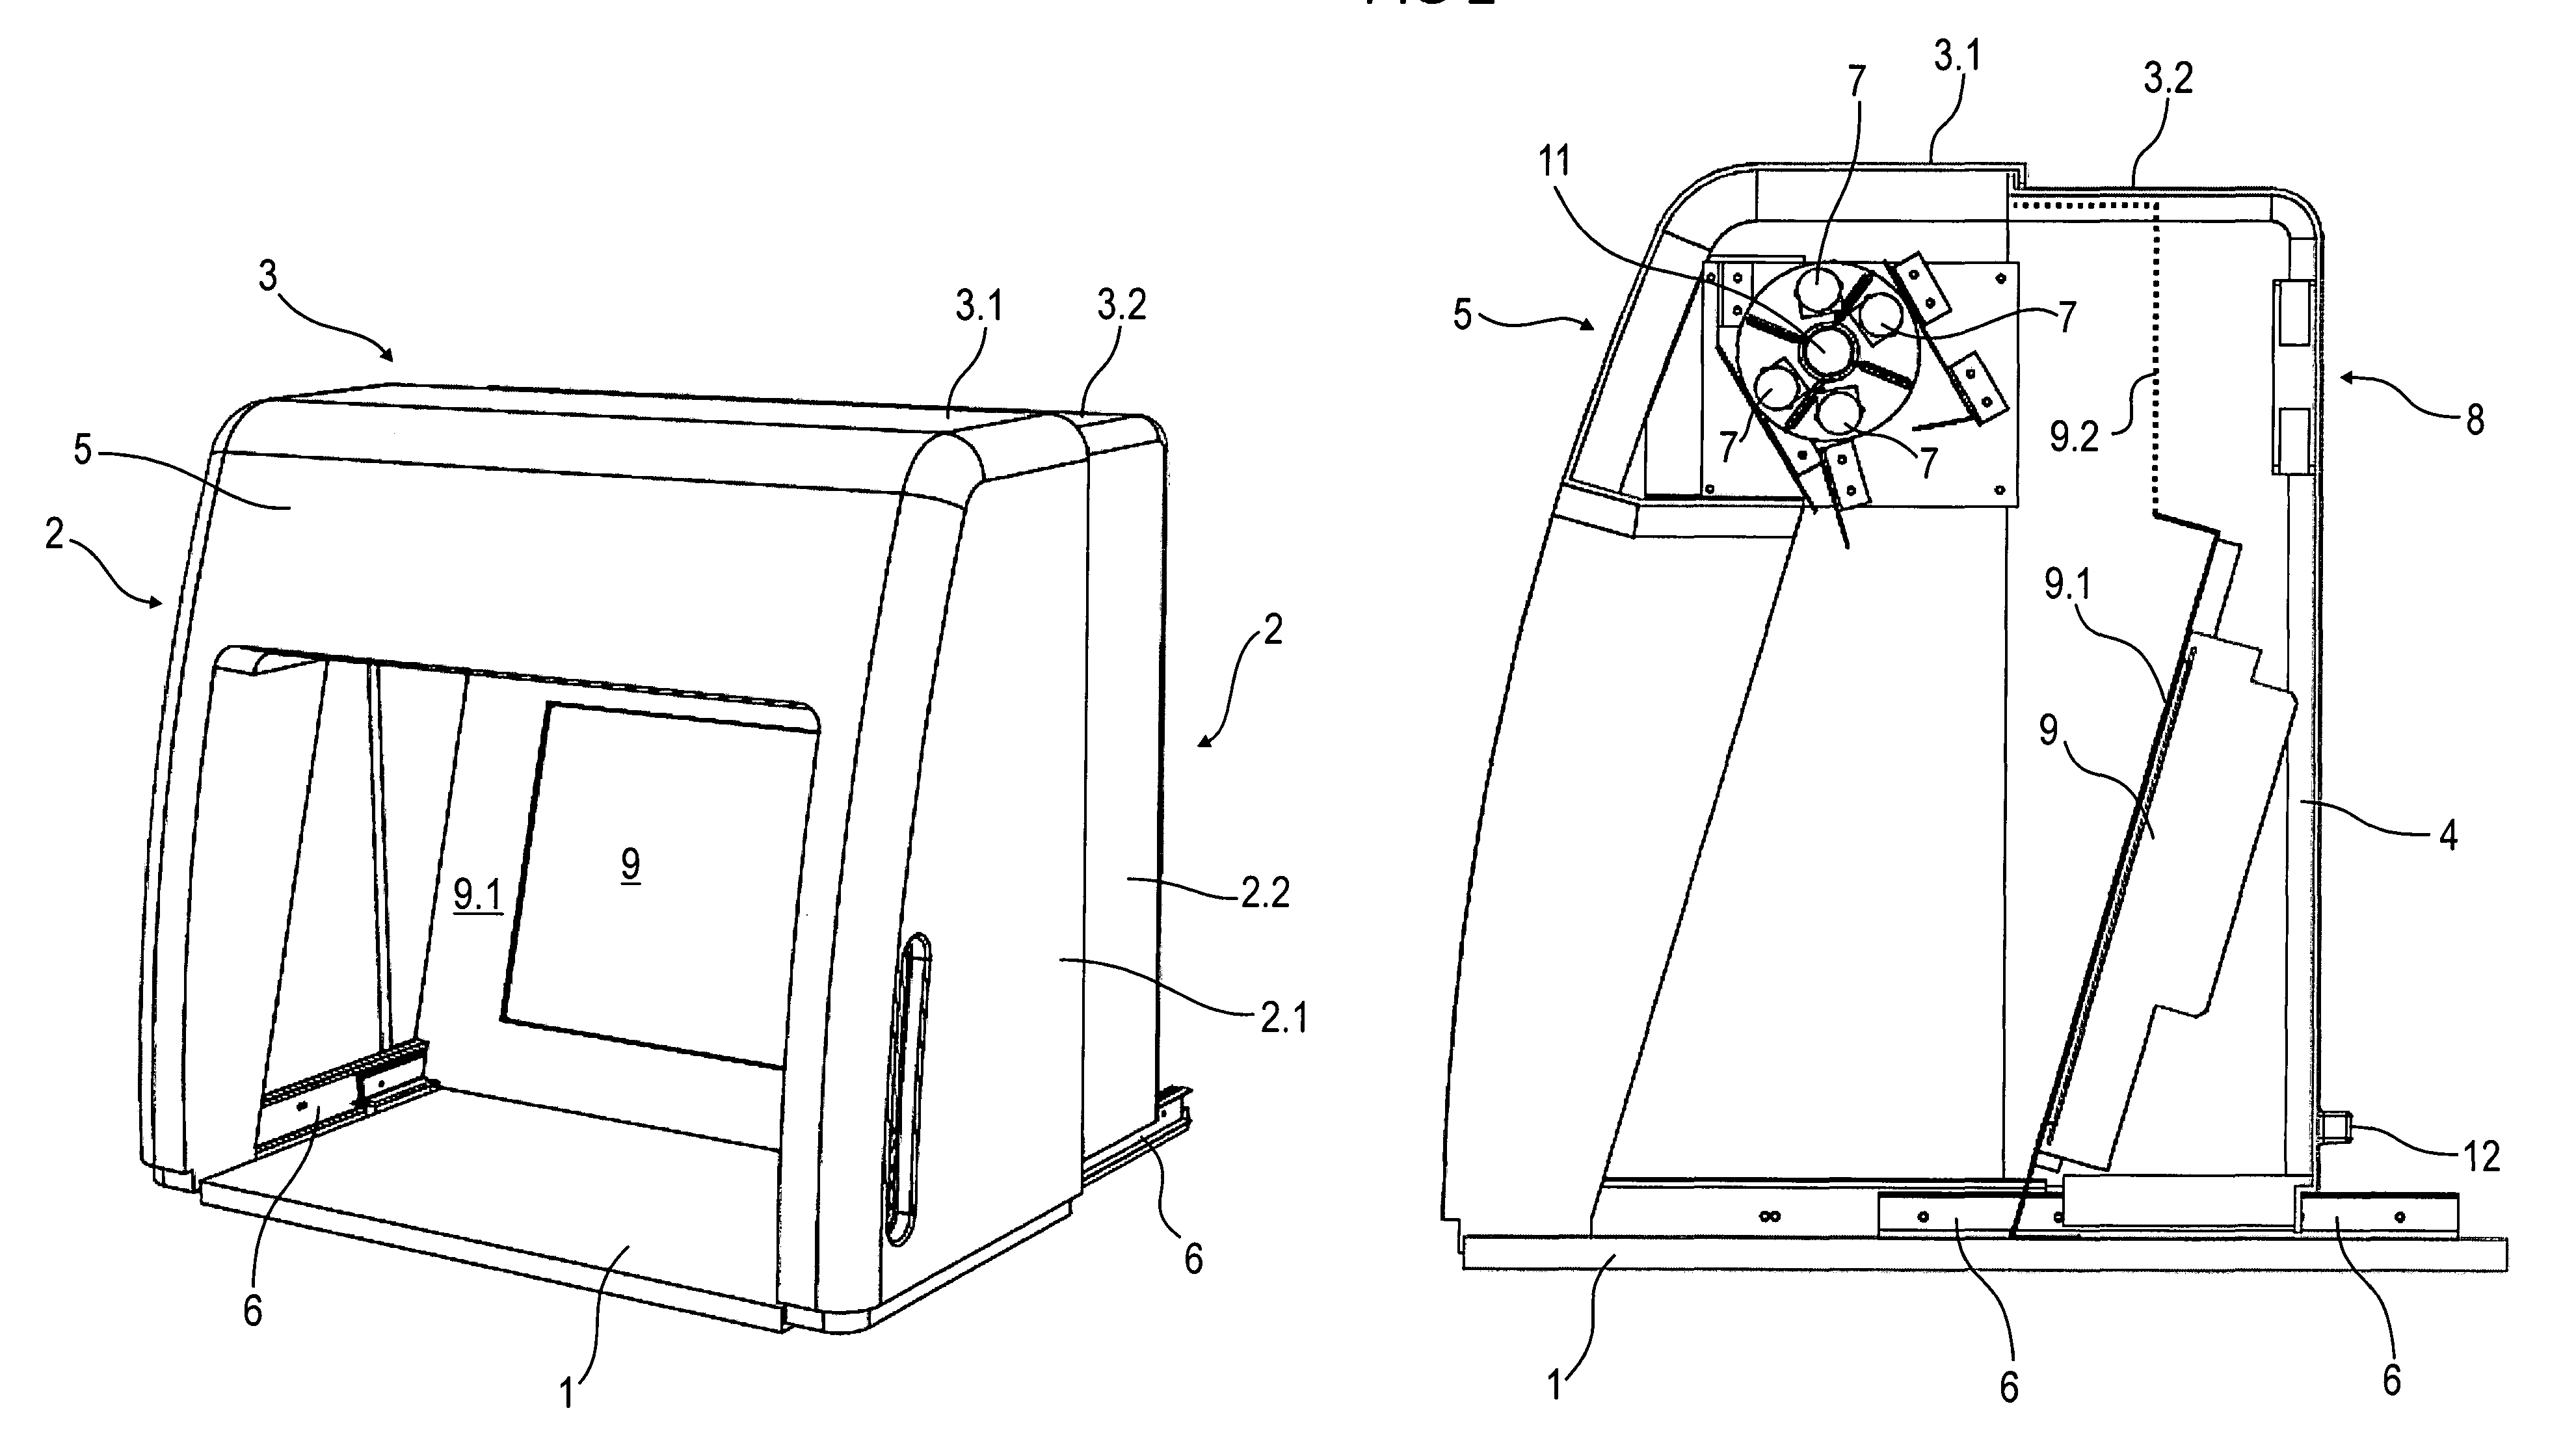 Device for shading extraneous light and for creating defined lighting conditions on a monitor